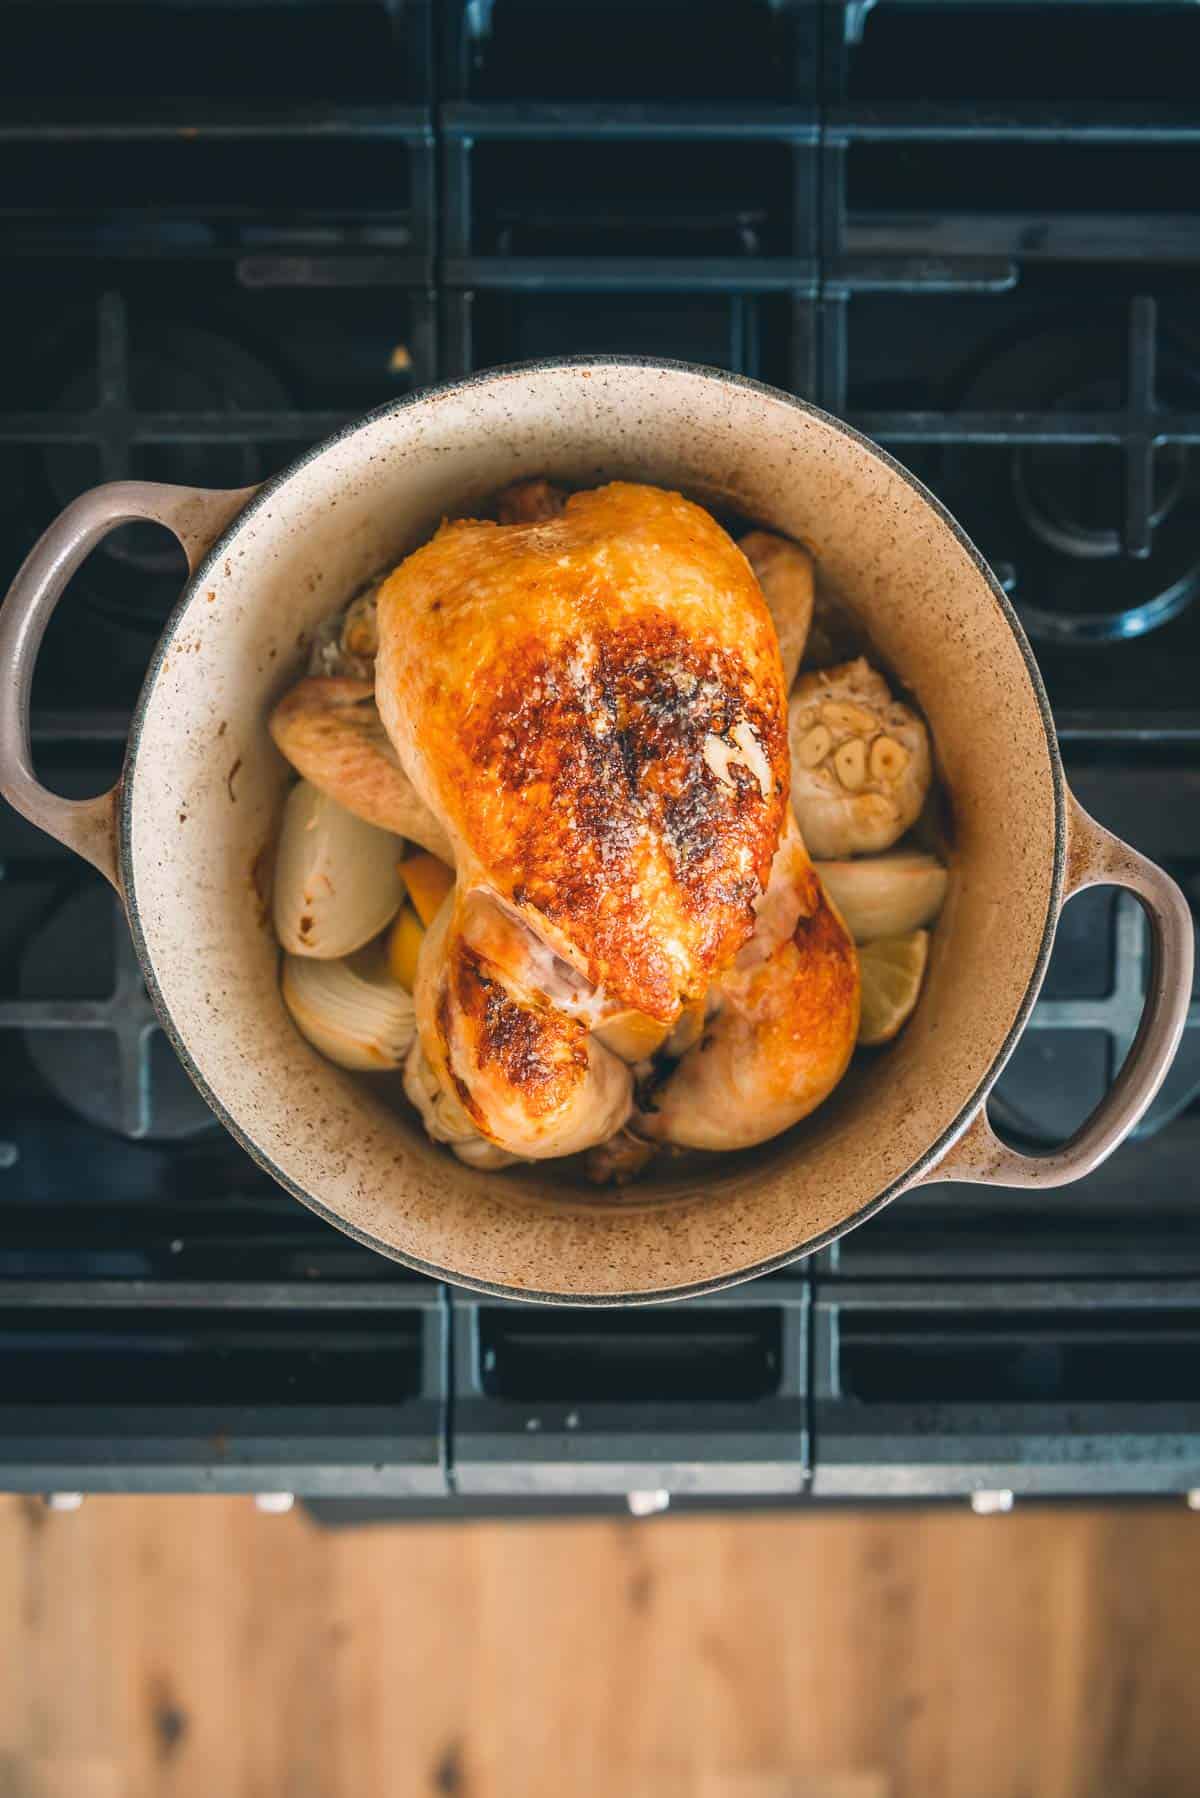 Golden brown chicken in a pan on a stove top after being roasted.